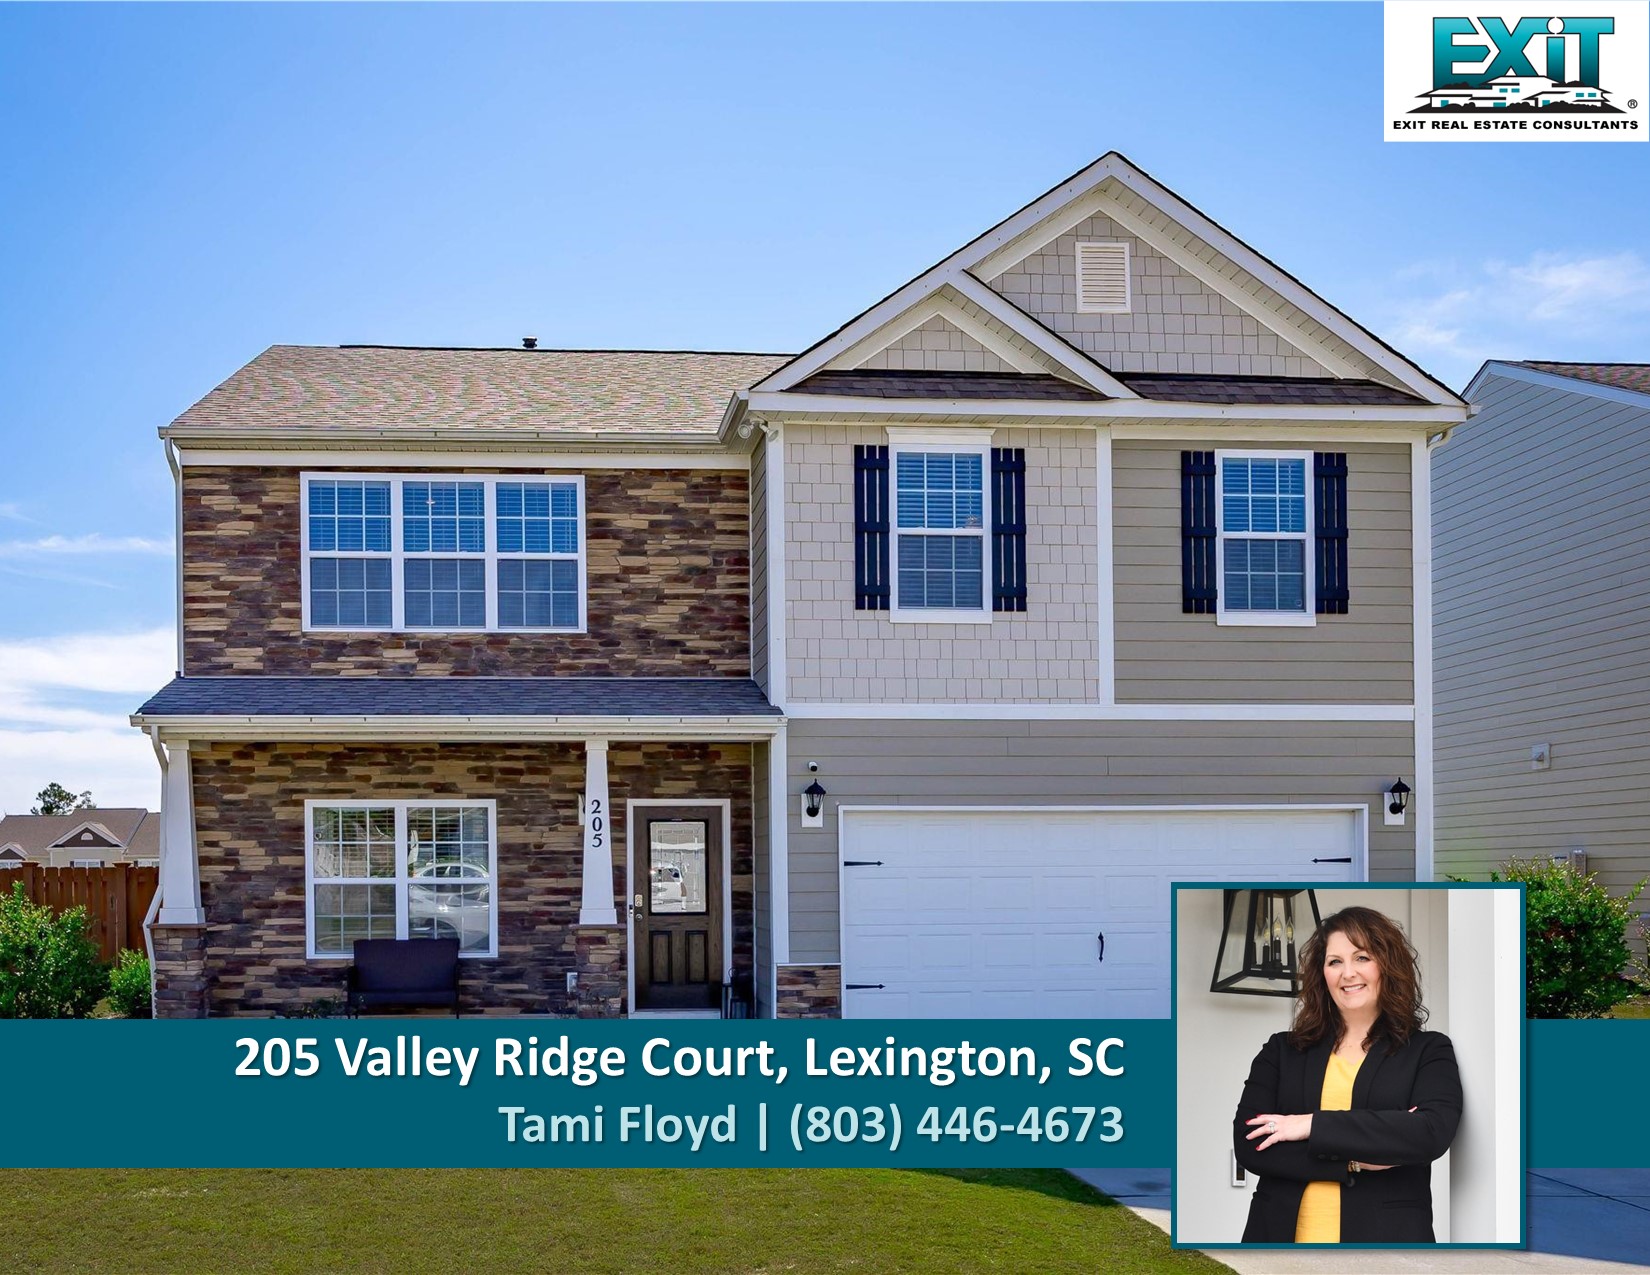 Just listed in Village Green Estates - Lexington